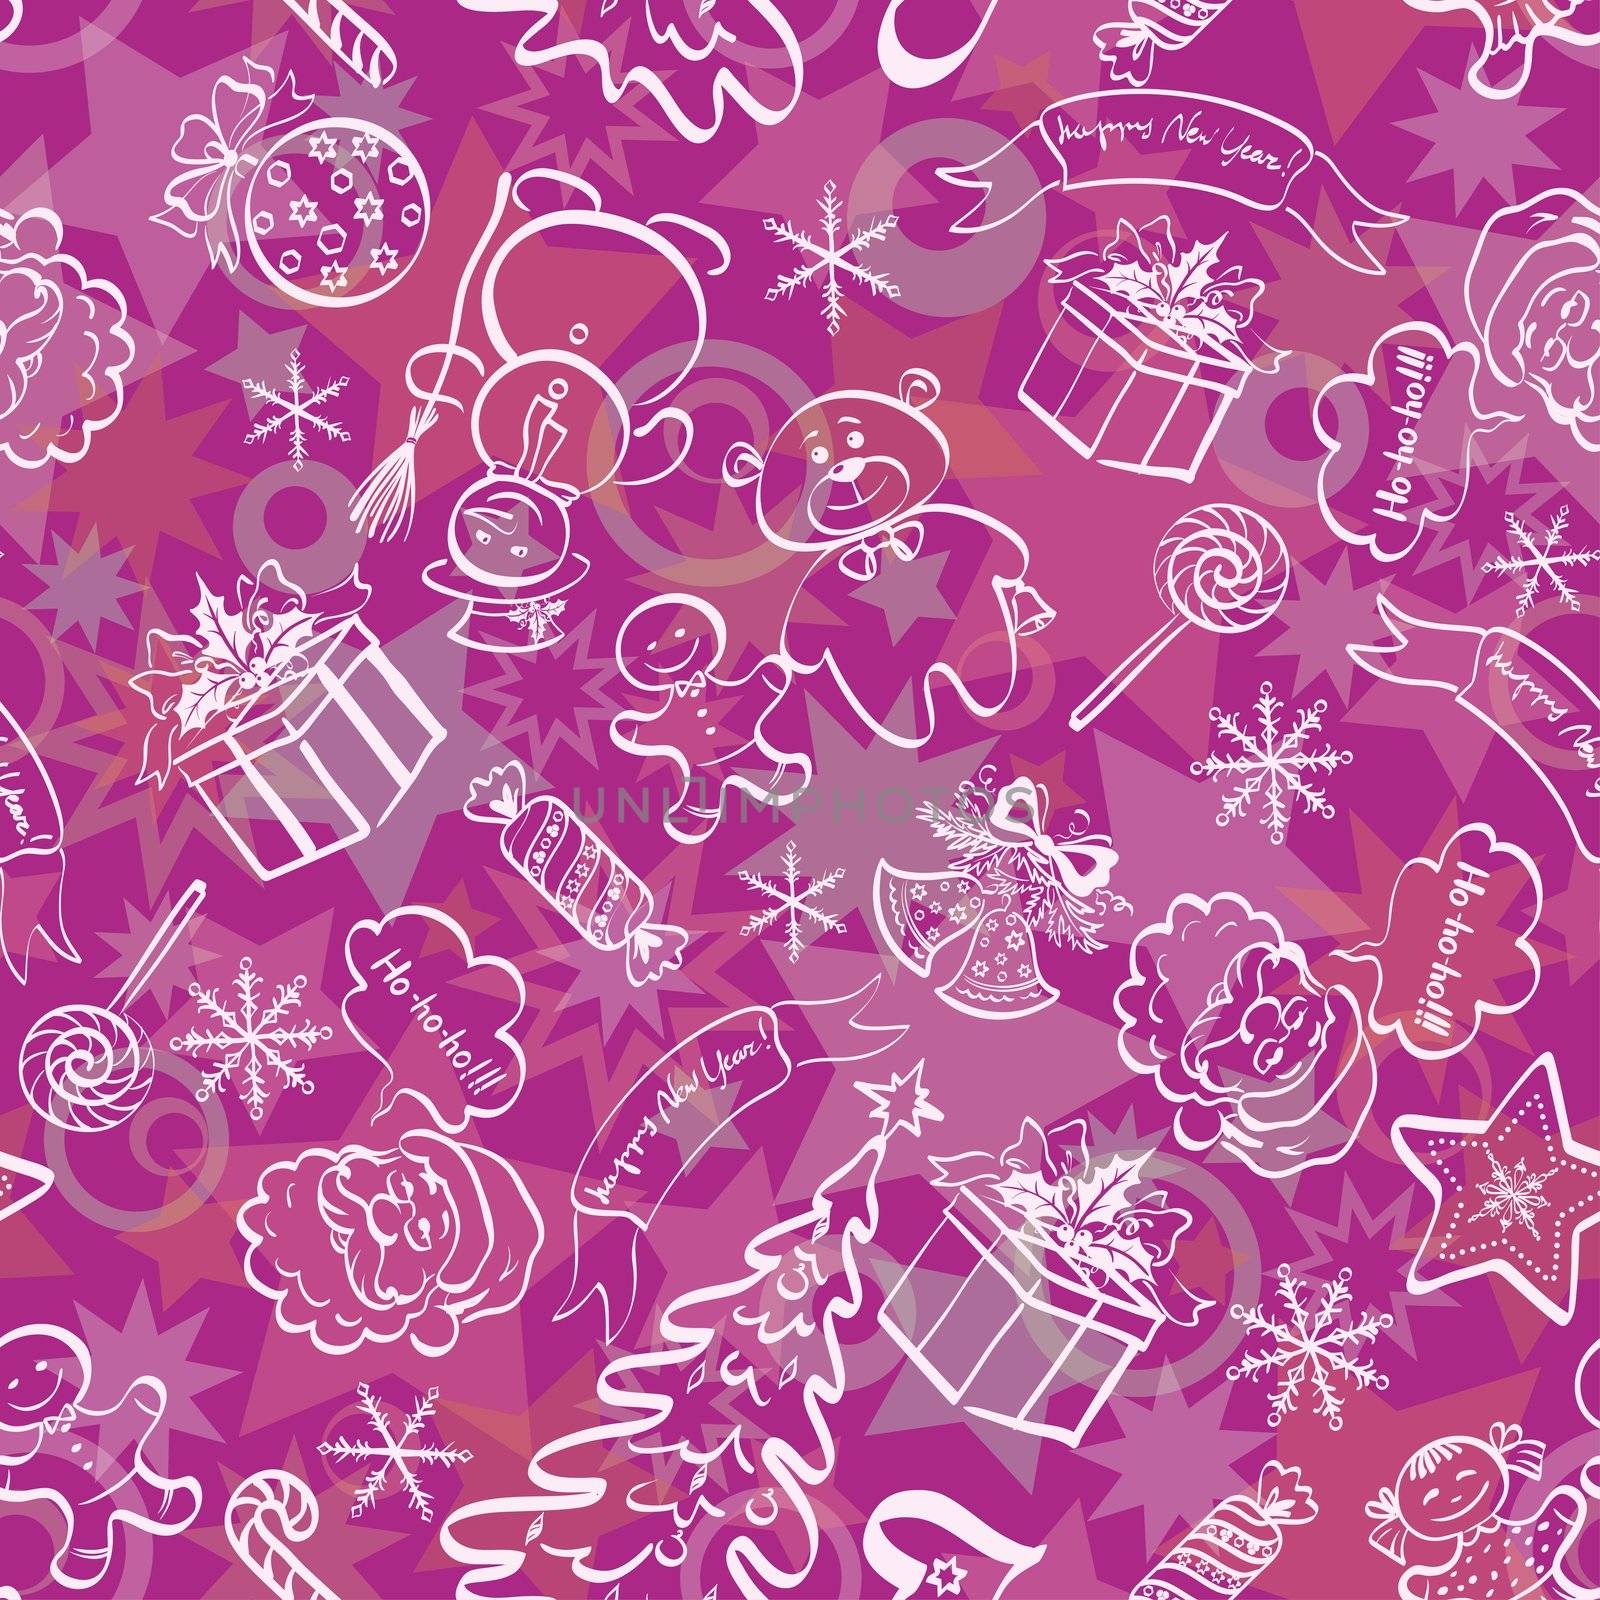 Christmas cartoon seamless background for holiday design, white contours on lilac